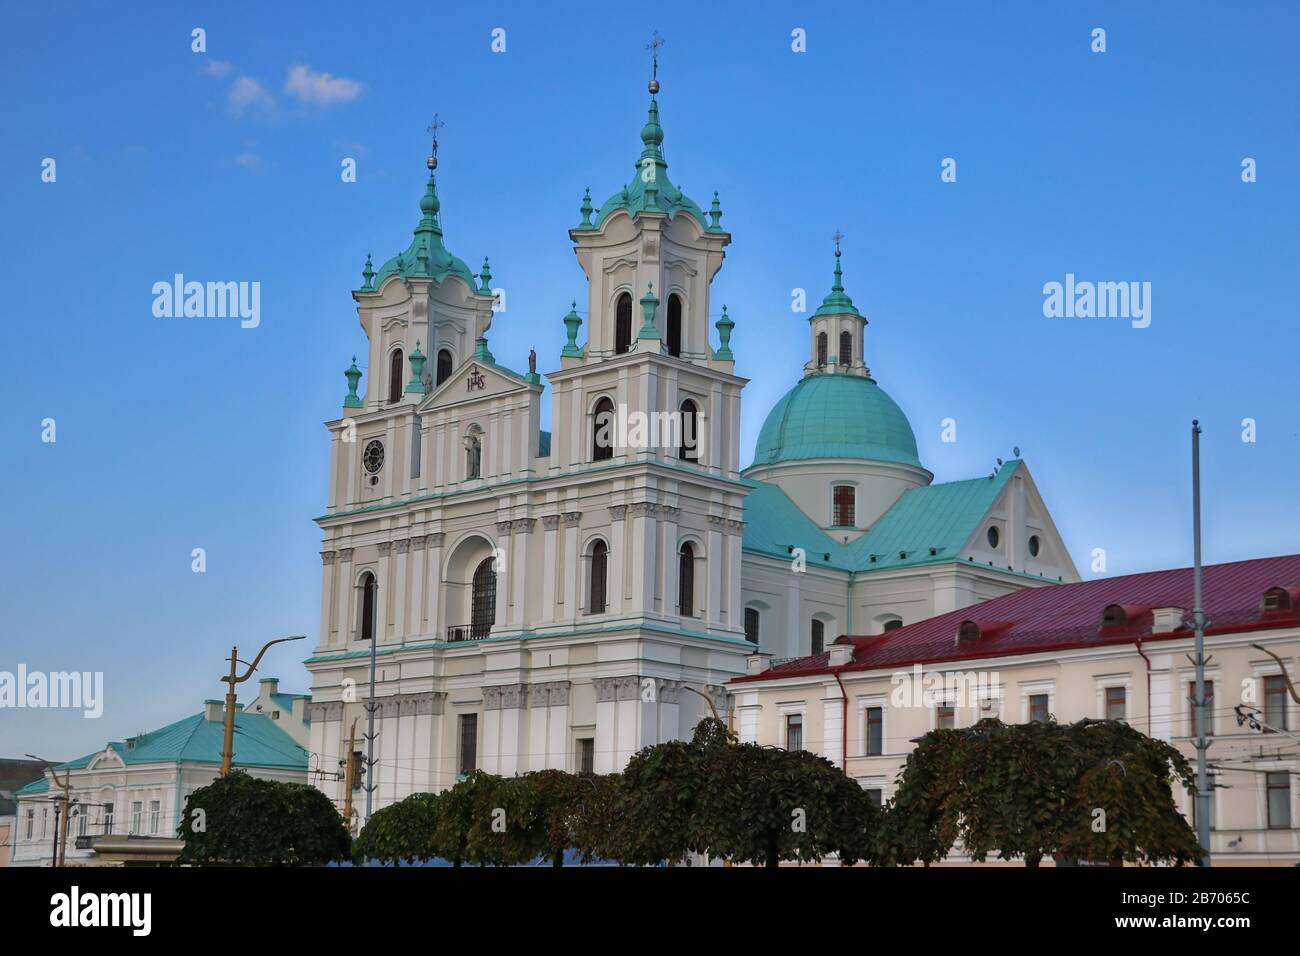 Grodno, Belarus - May 15, 2019: Famous landmark is St. Francis Xavier Cathedral in Grodno. Best destination for summer vacation in East Europe Stock Photo